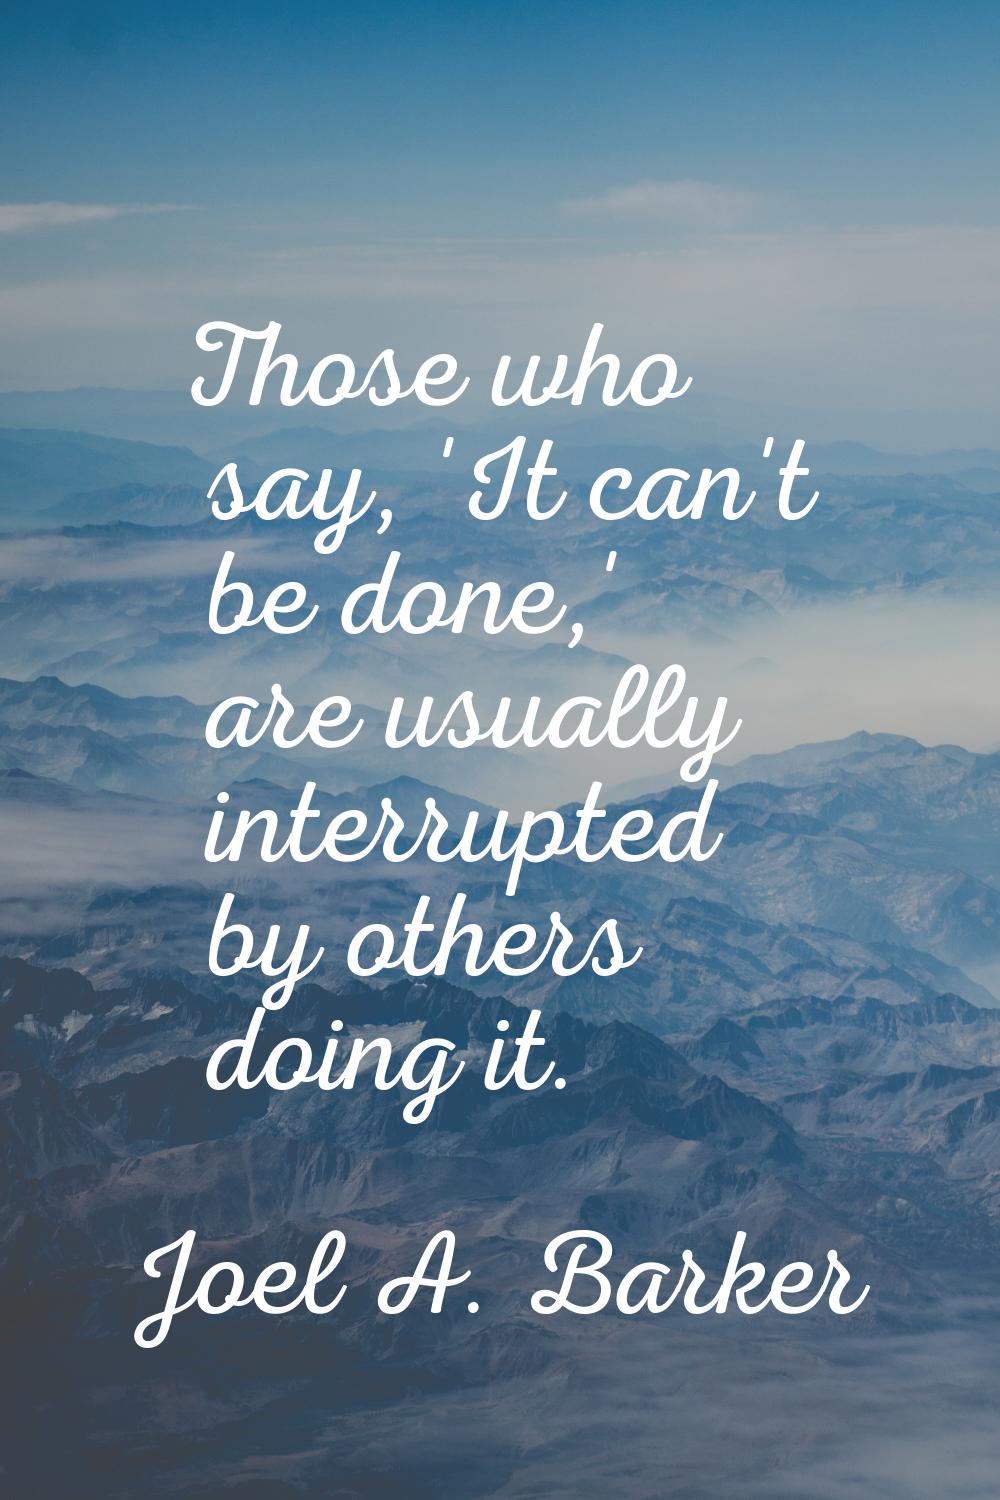 Those who say, 'It can't be done,' are usually interrupted by others doing it.